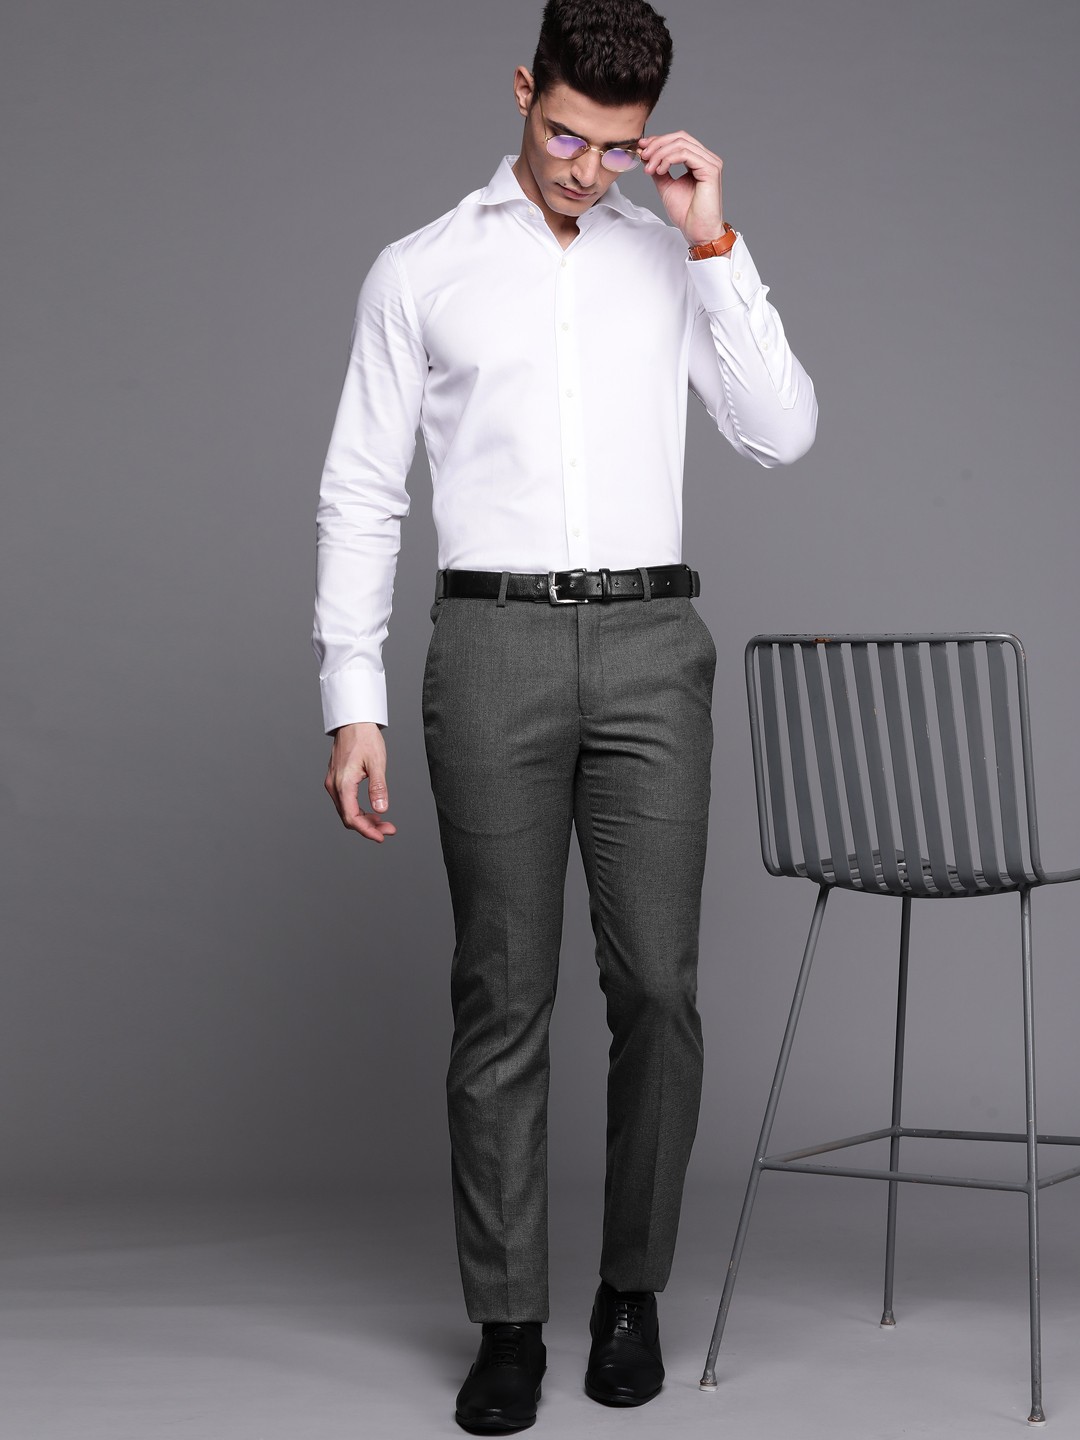 Solid Charcoal Grey Pant from Raymond White Shirt Combination